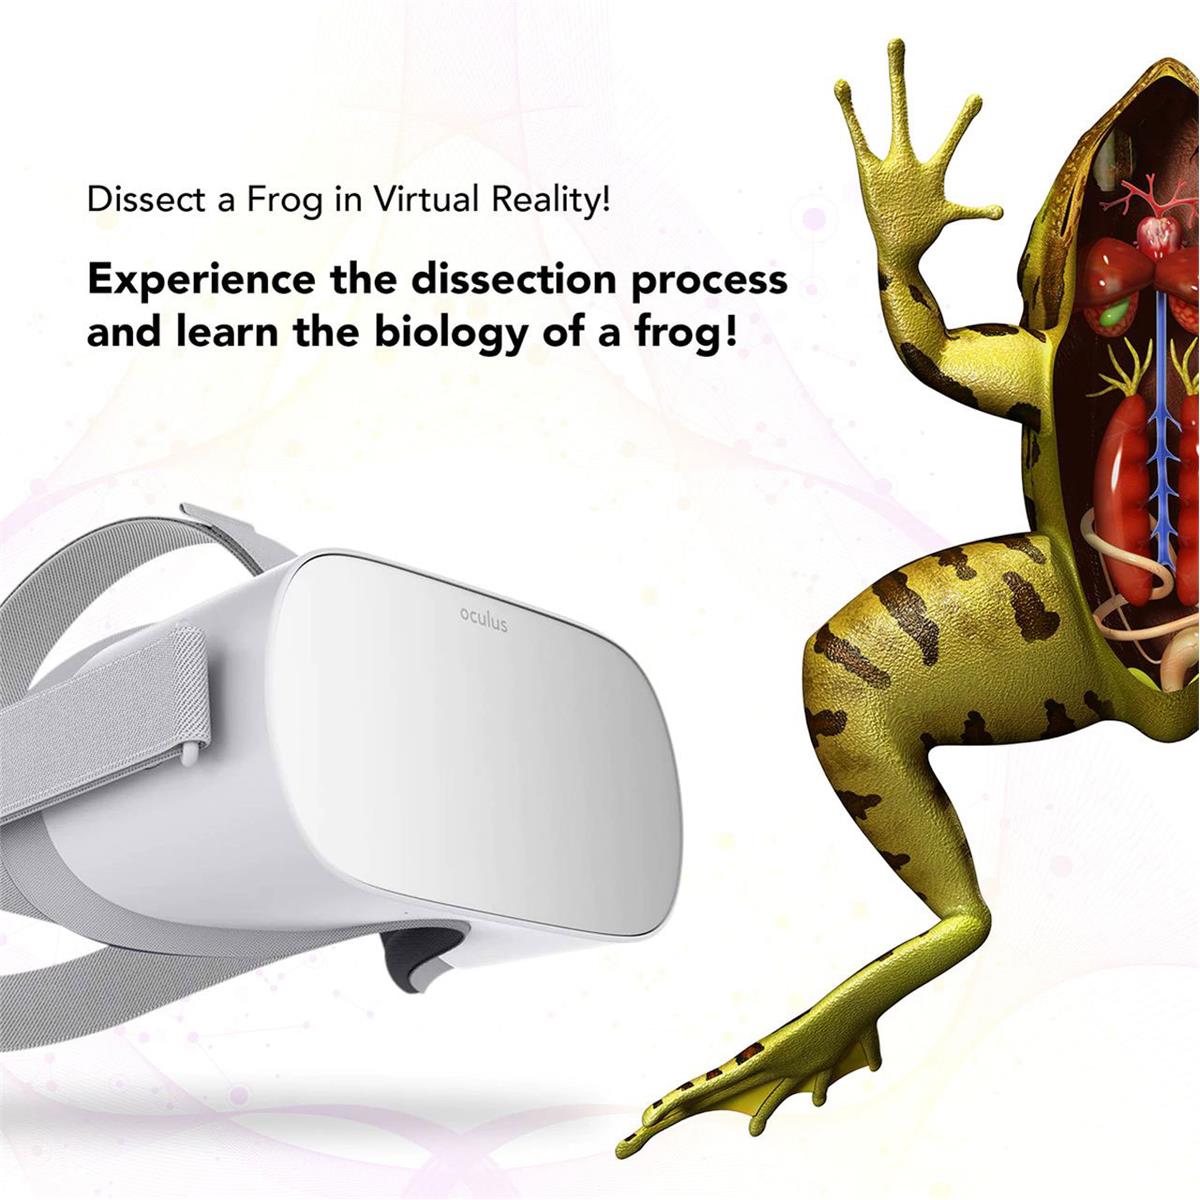 Image of Hamilton Buhl VR3-OG8 Sci-Lab Educational Experience Licenses